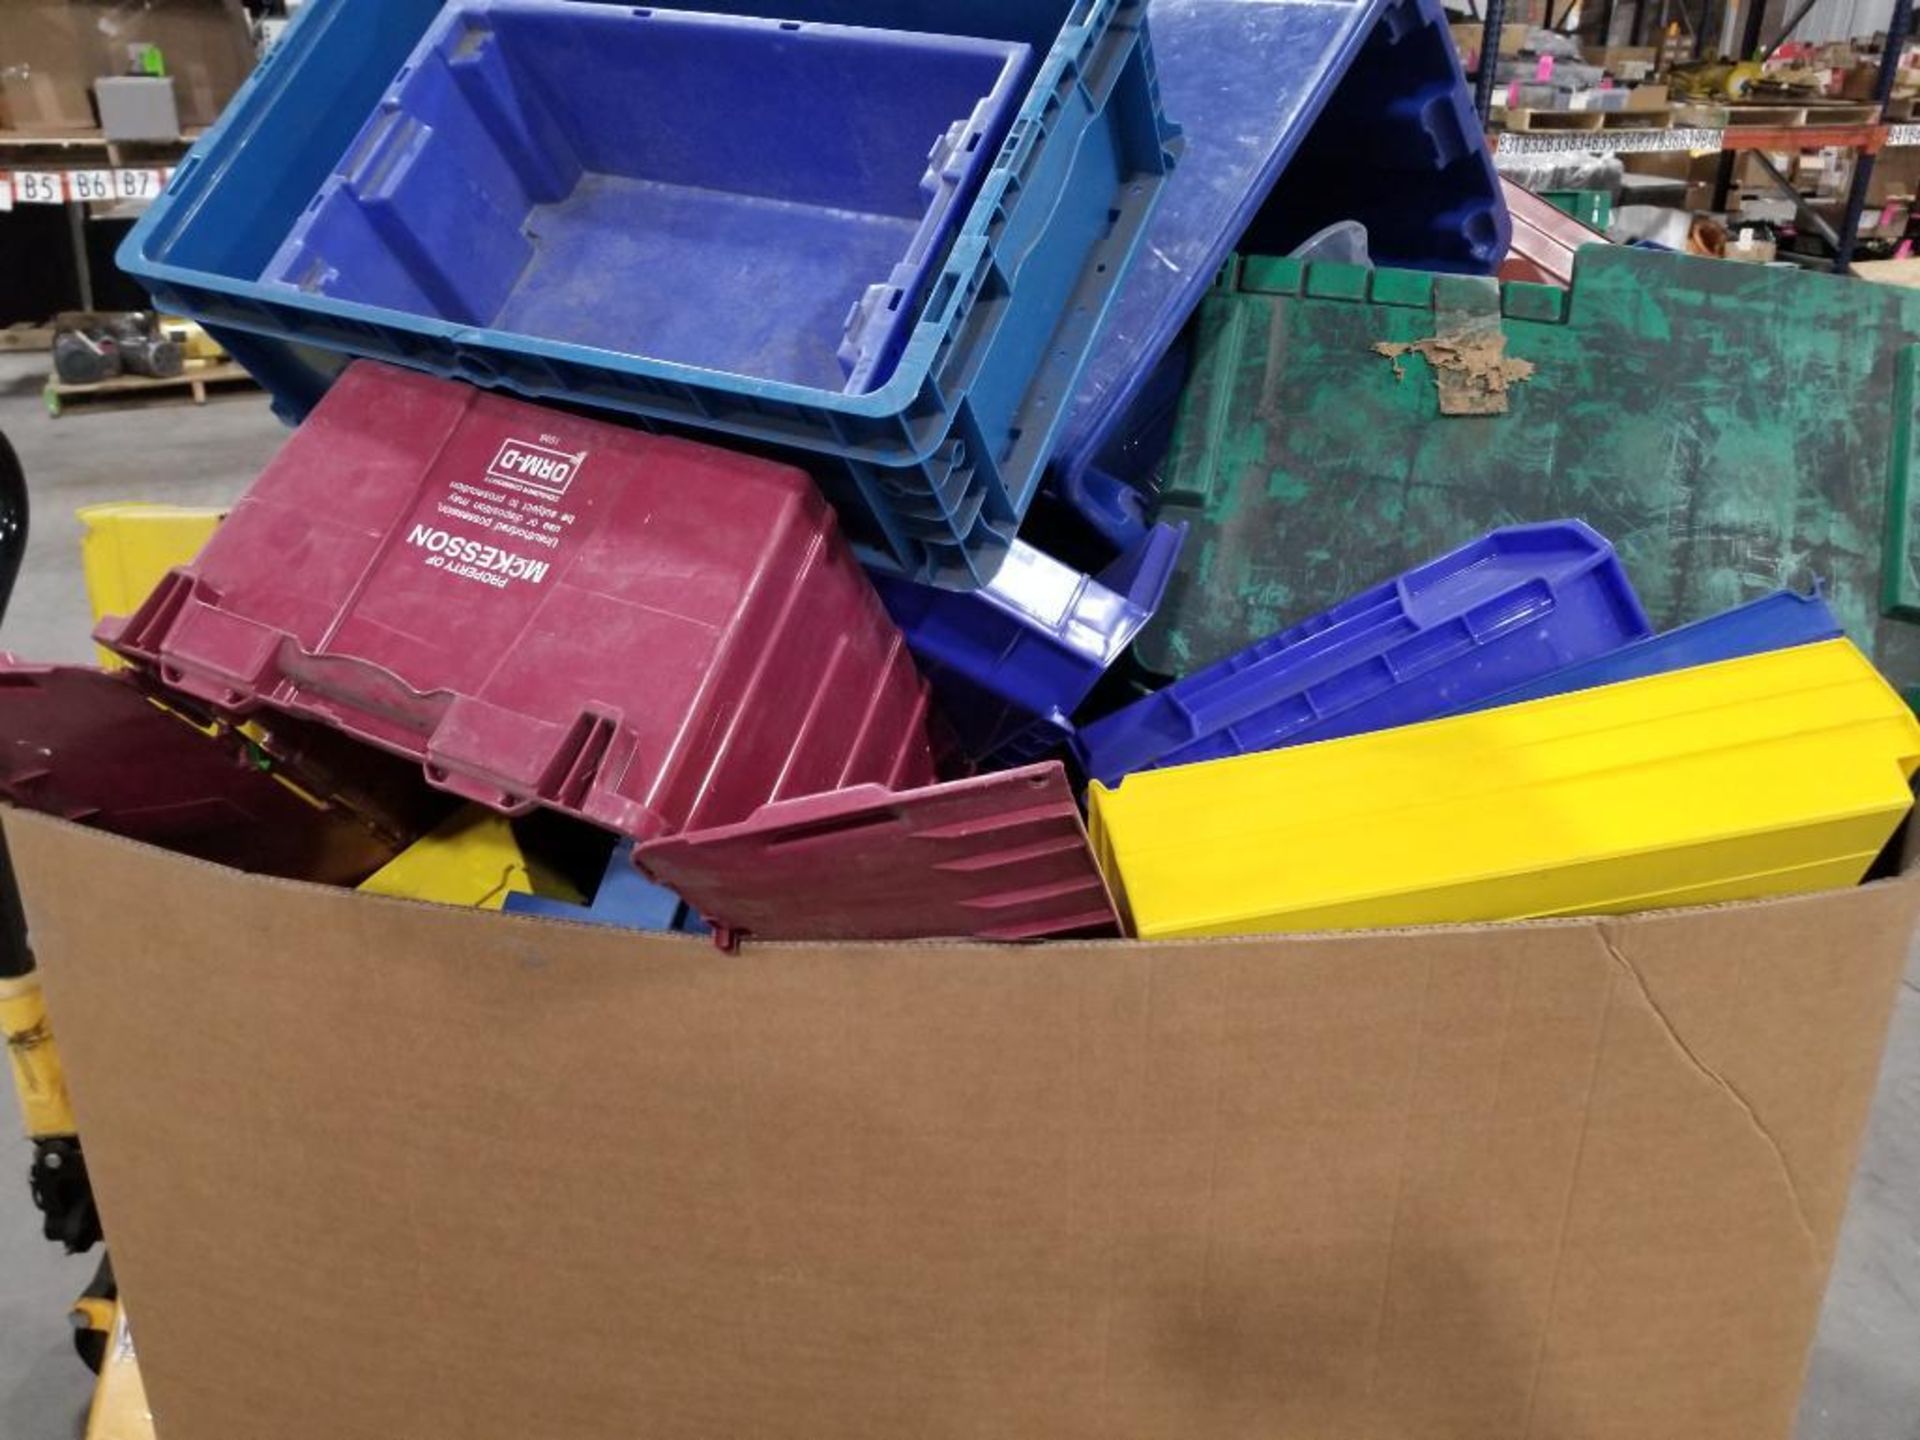 Gaylord of plastic bins. - Image 11 of 13